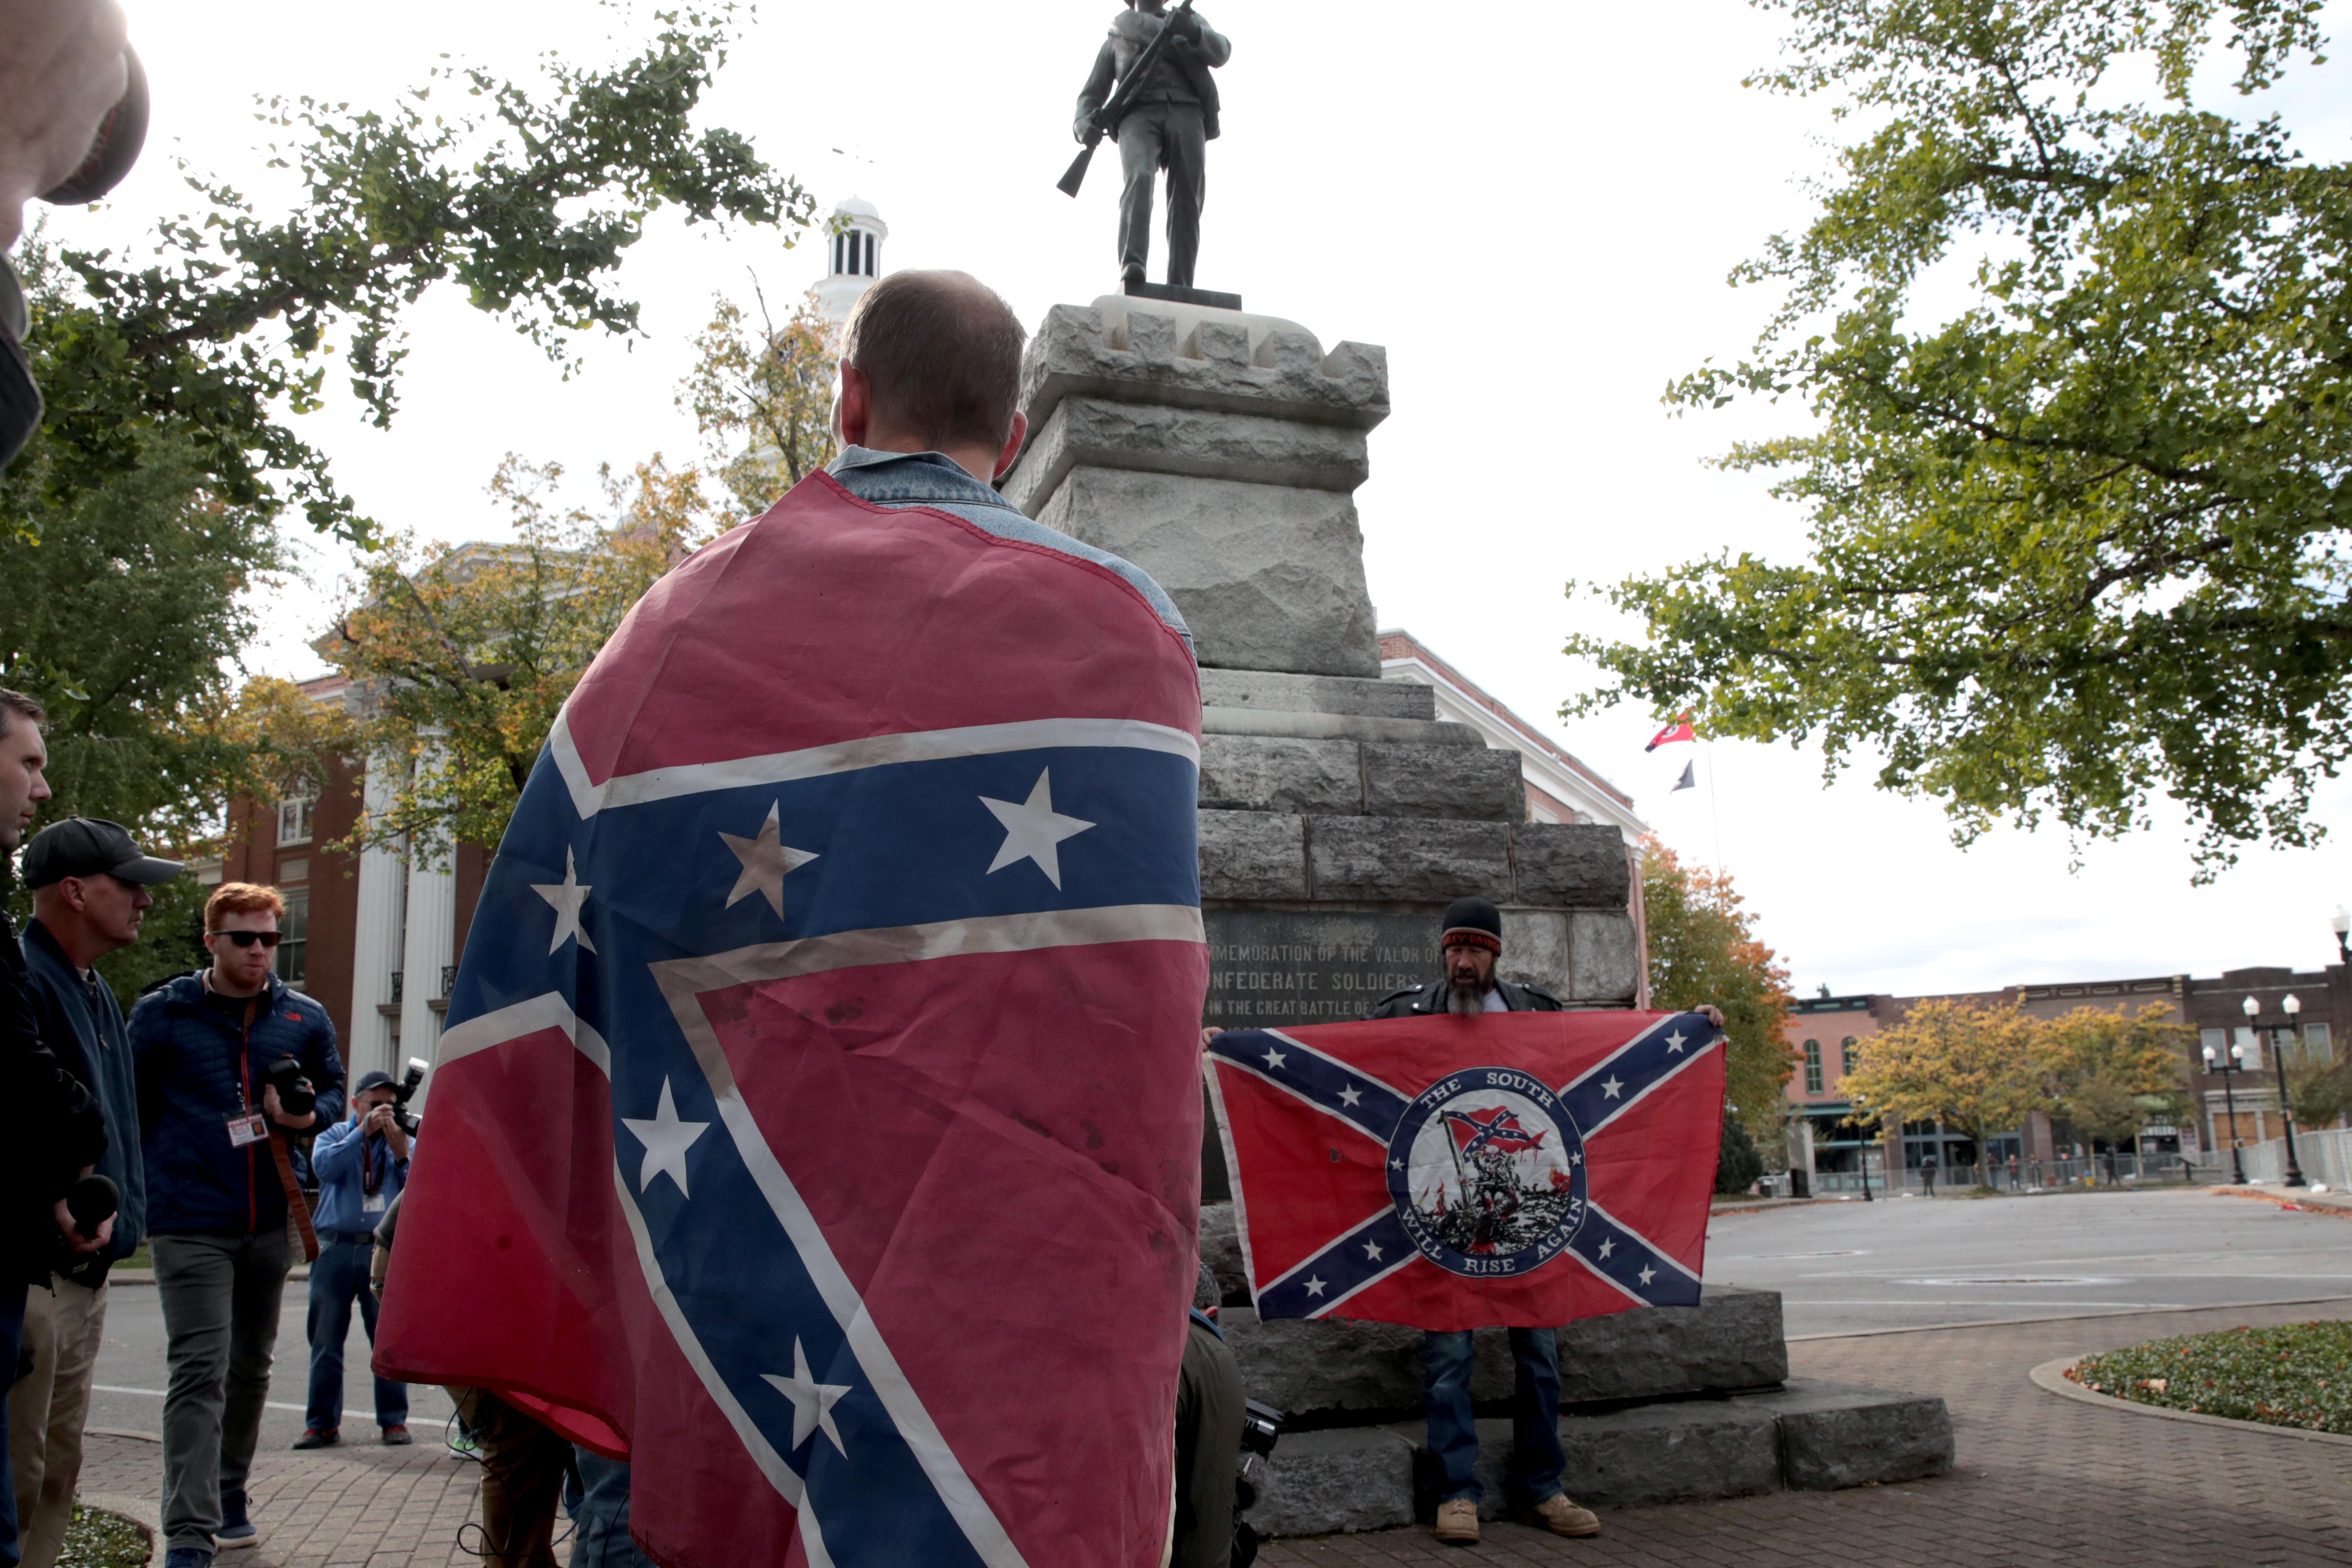 A man wrapped in a Confederate flag stands in front of a Confederate statue at a rally.